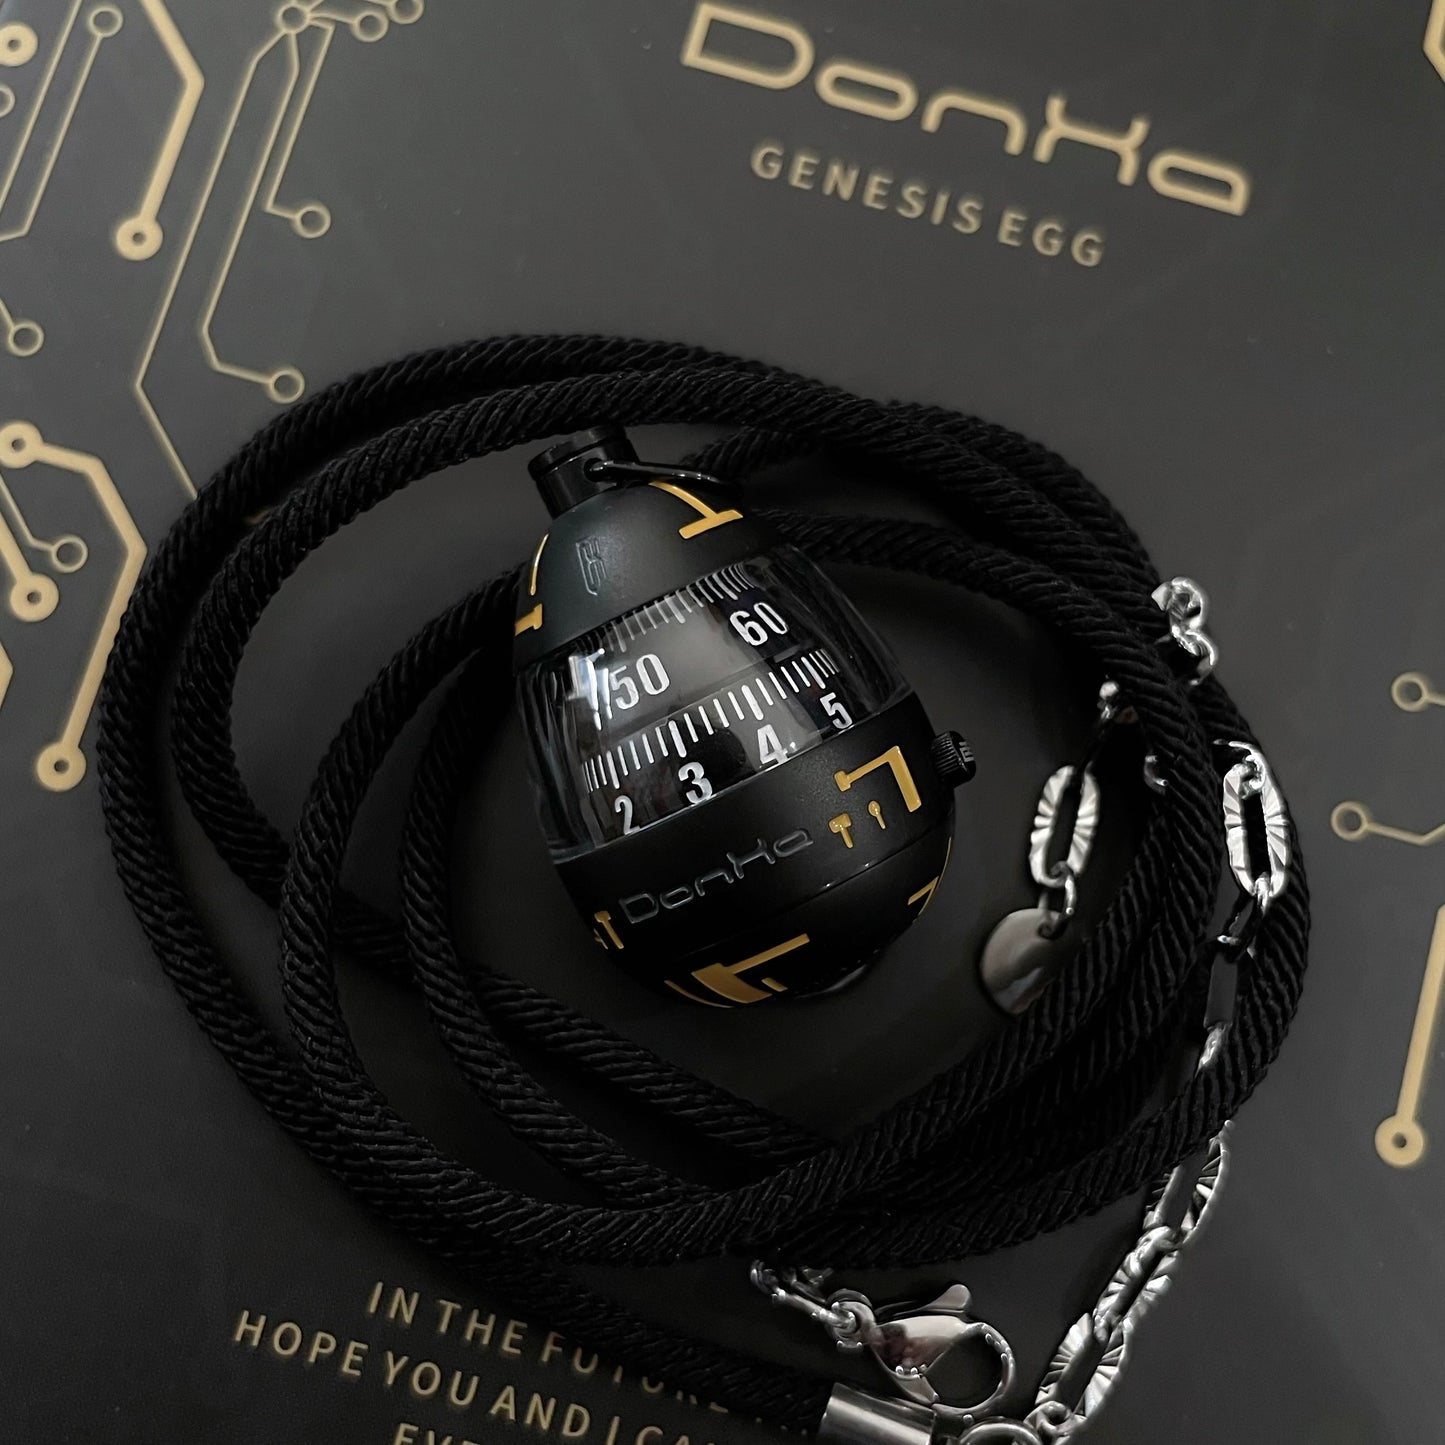 Donha Egg Watch To Slow Down Your Time